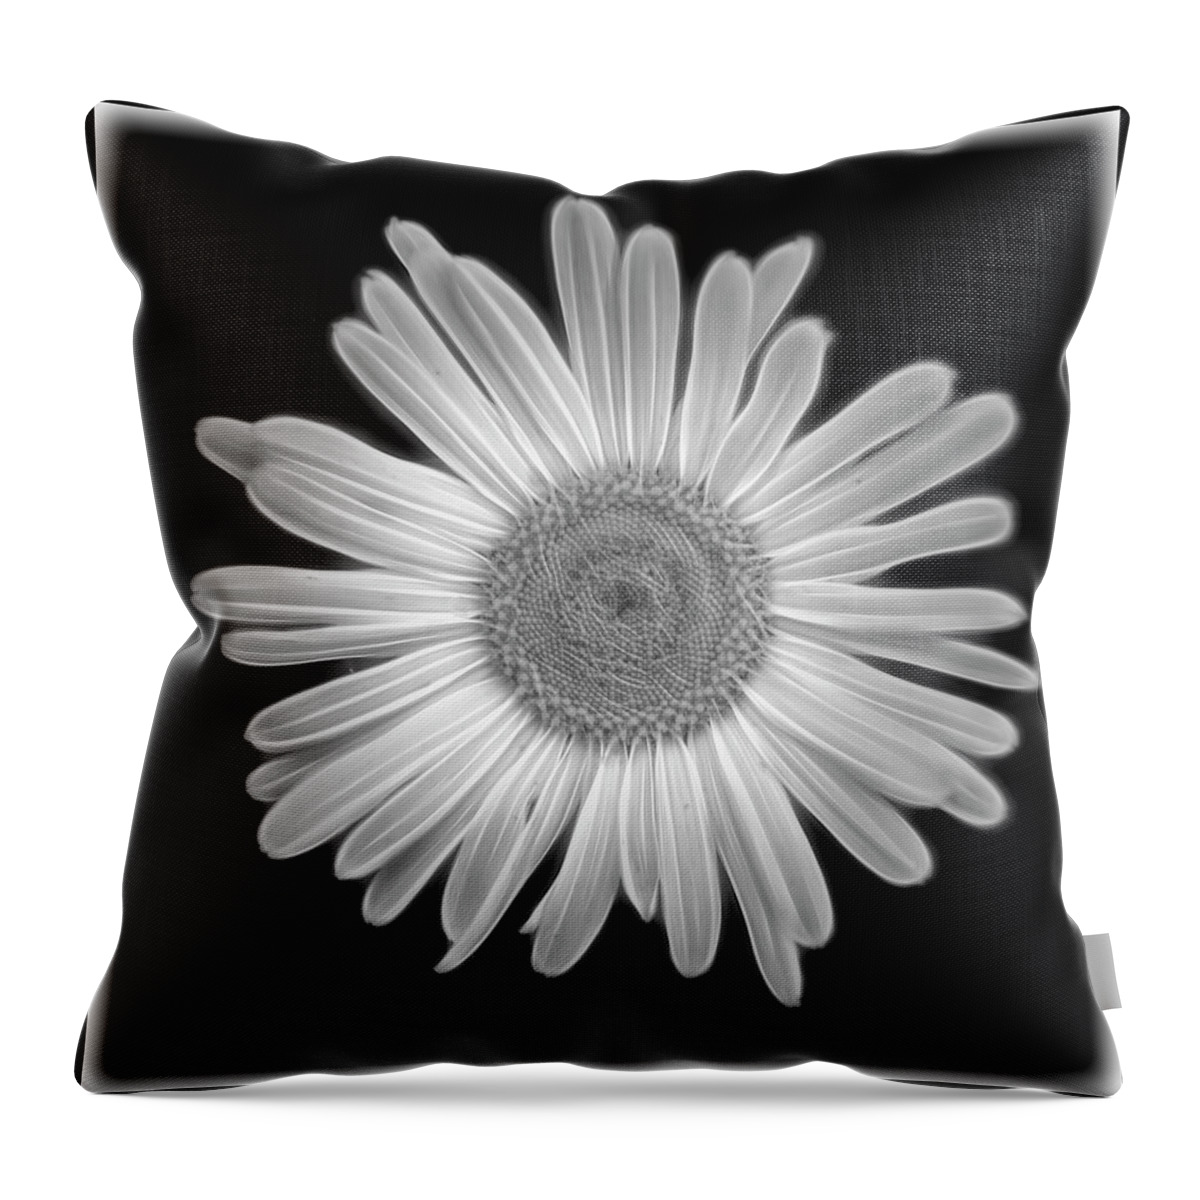 Black Throw Pillow featuring the photograph Glowing Daisy by Cathy Kovarik